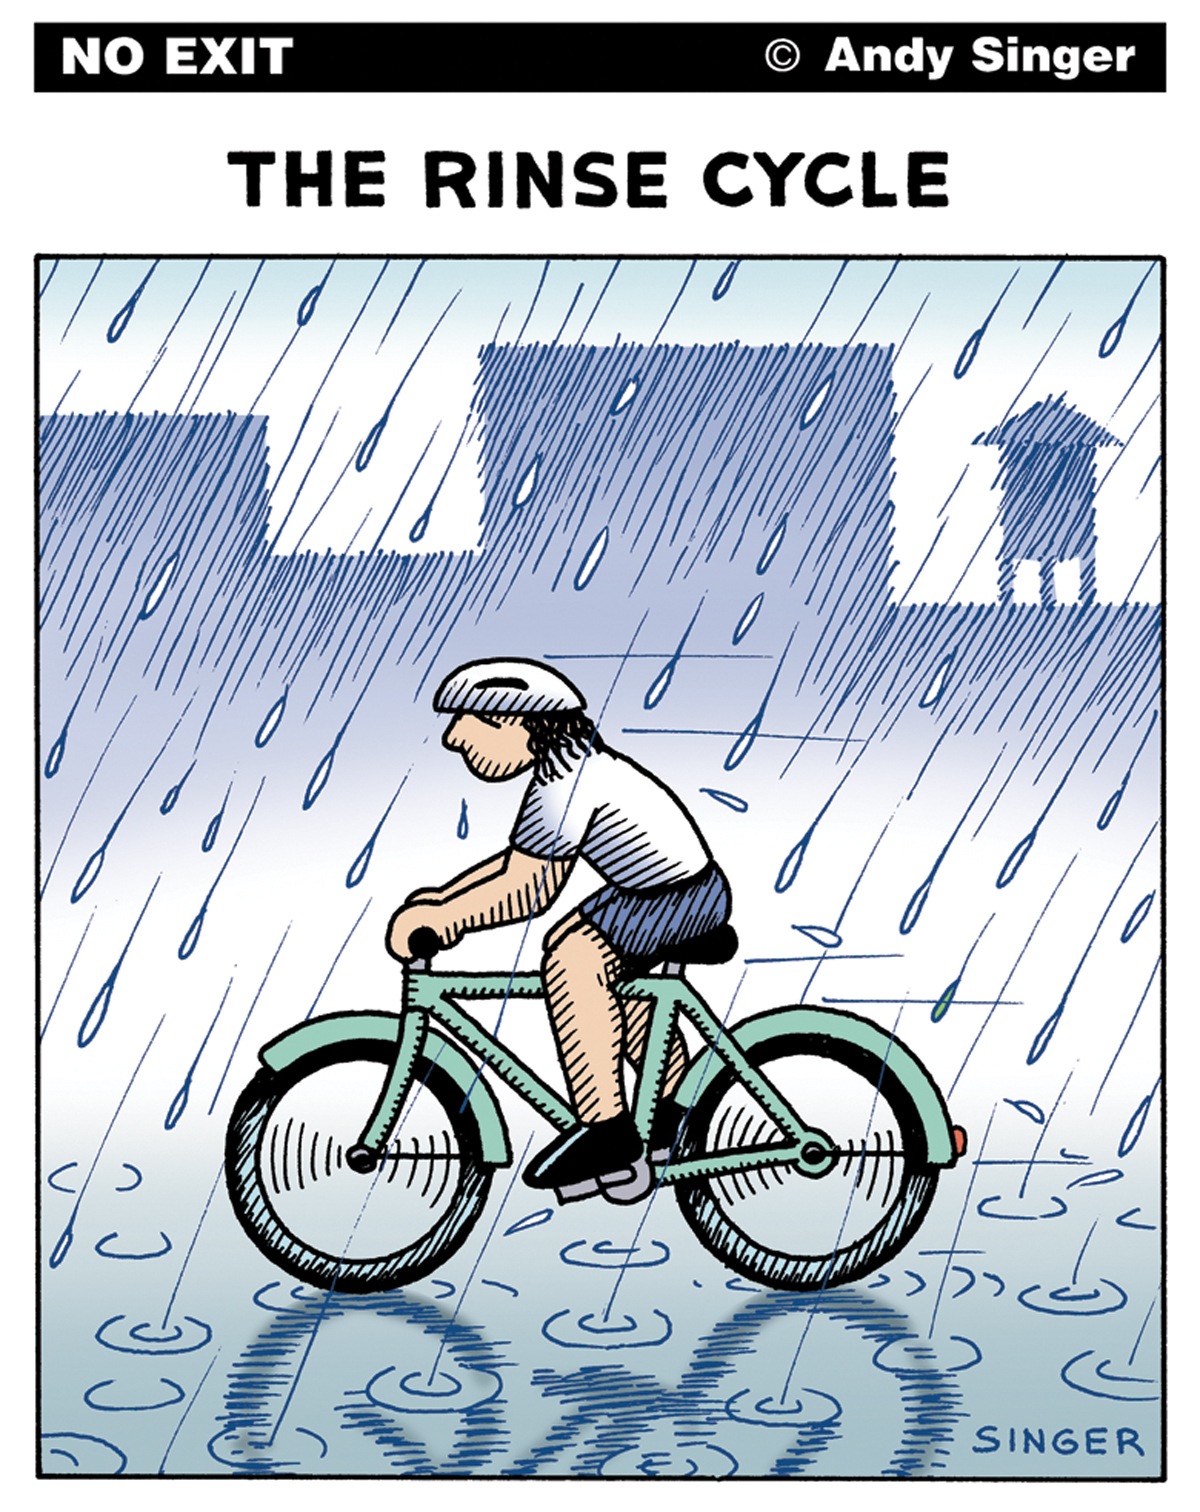 No Exit Bike Cartoon: The Rinse Cycle, by Andy Singer. A bicyclist rides in the rain